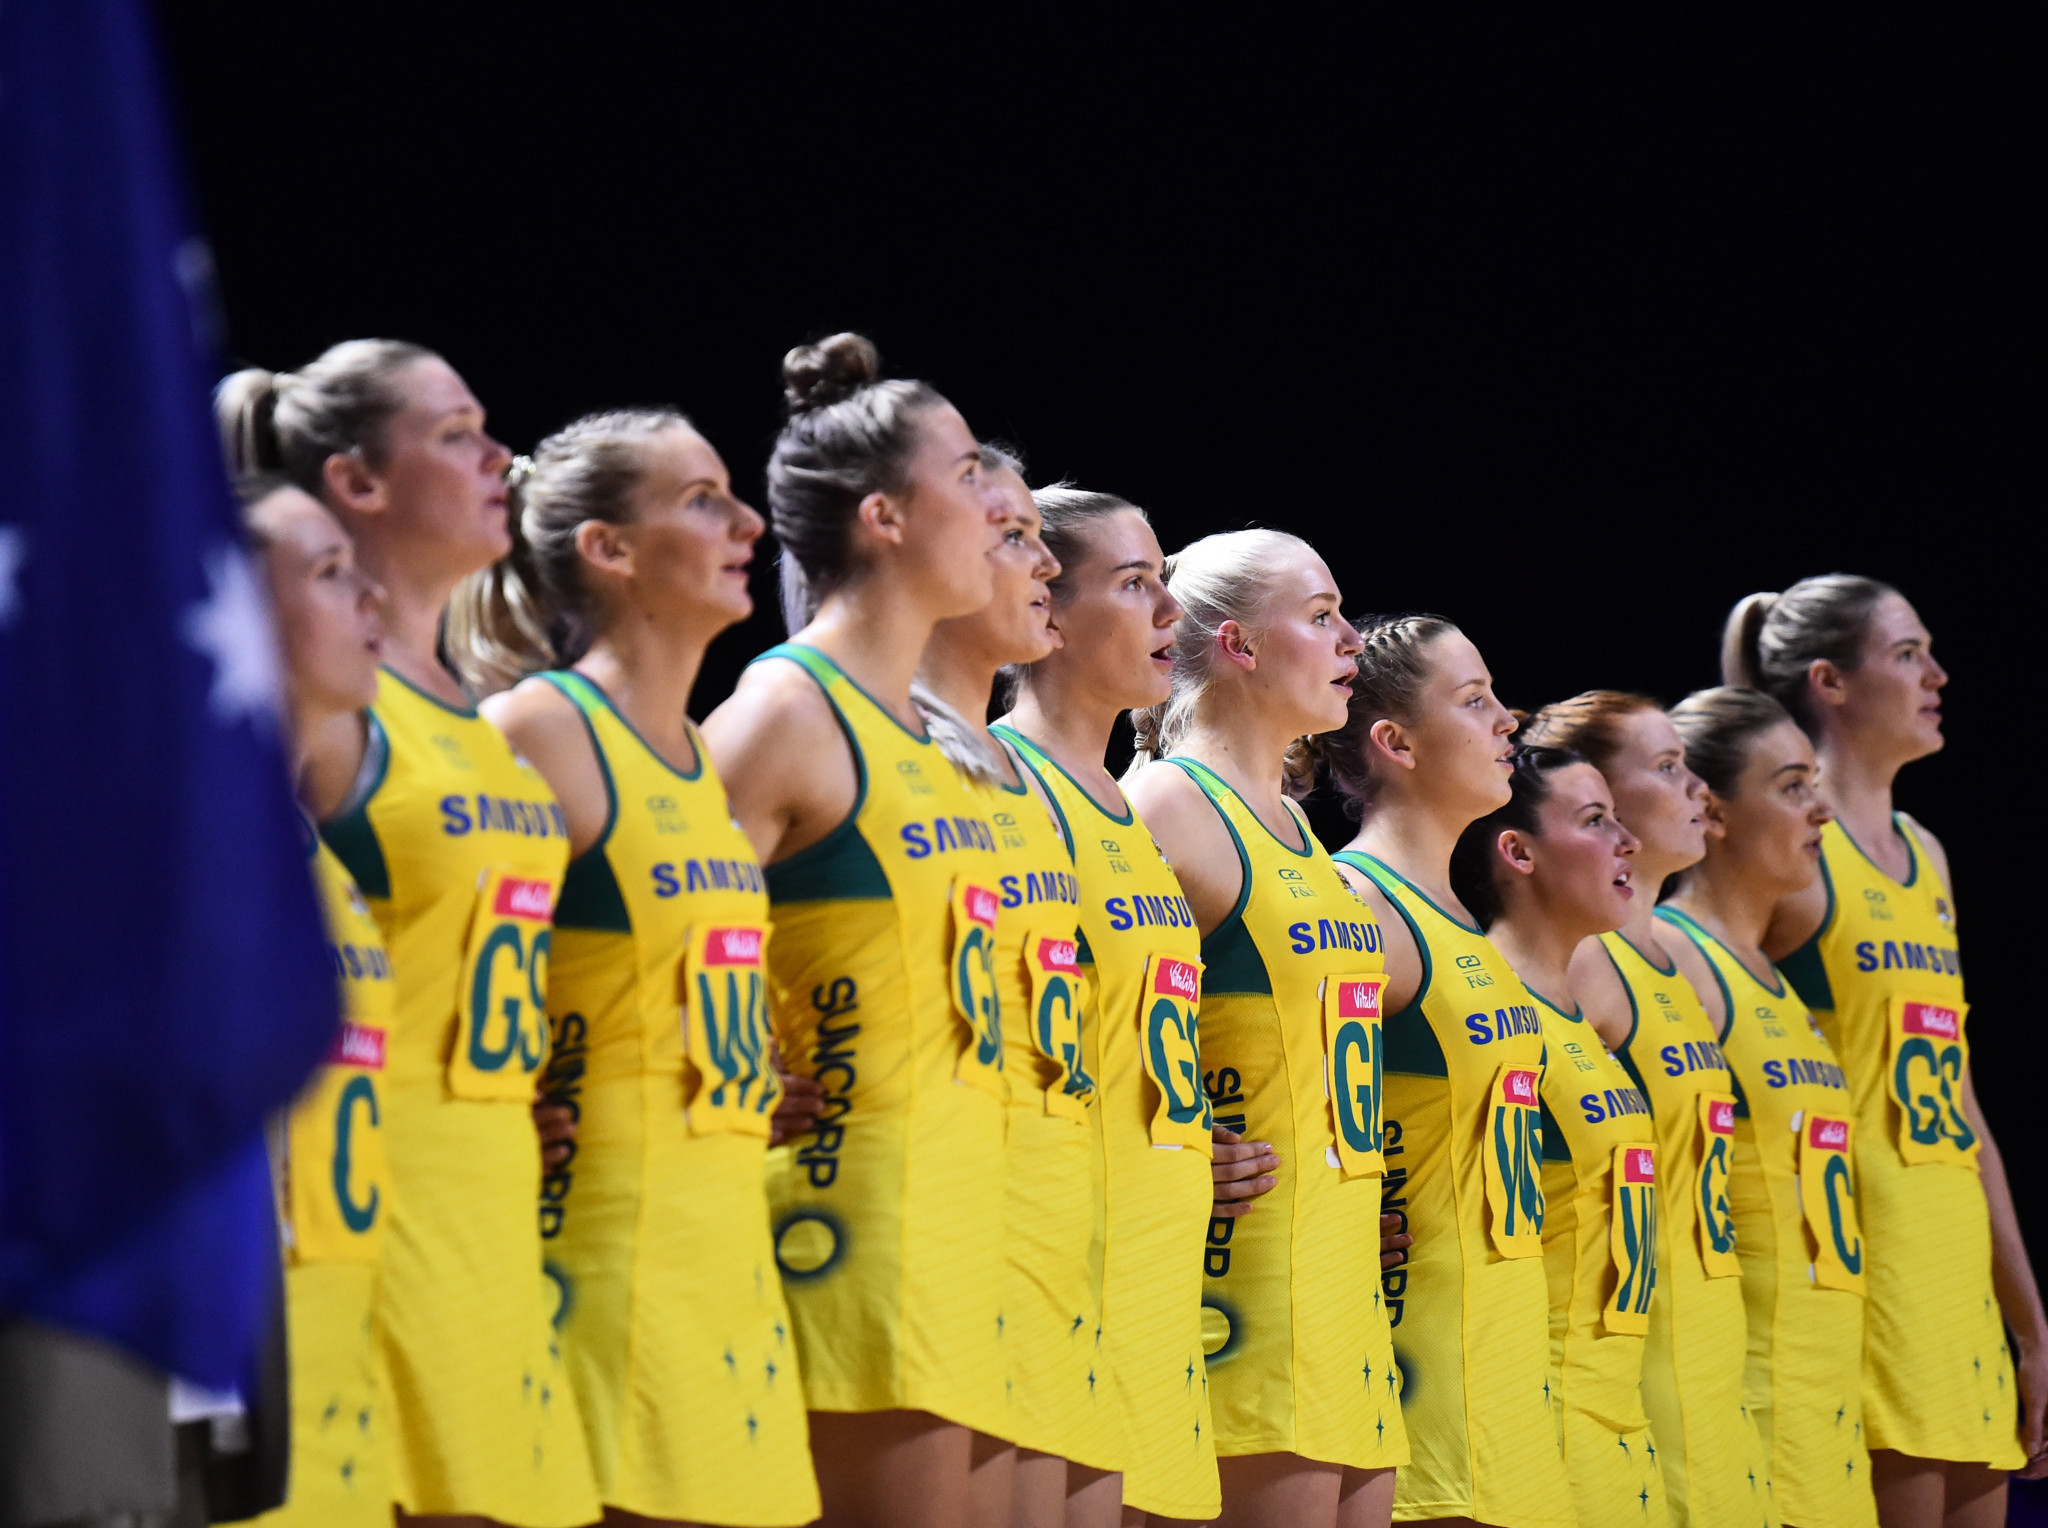 Australia retain top spot as final netball world rankings of 2019 published